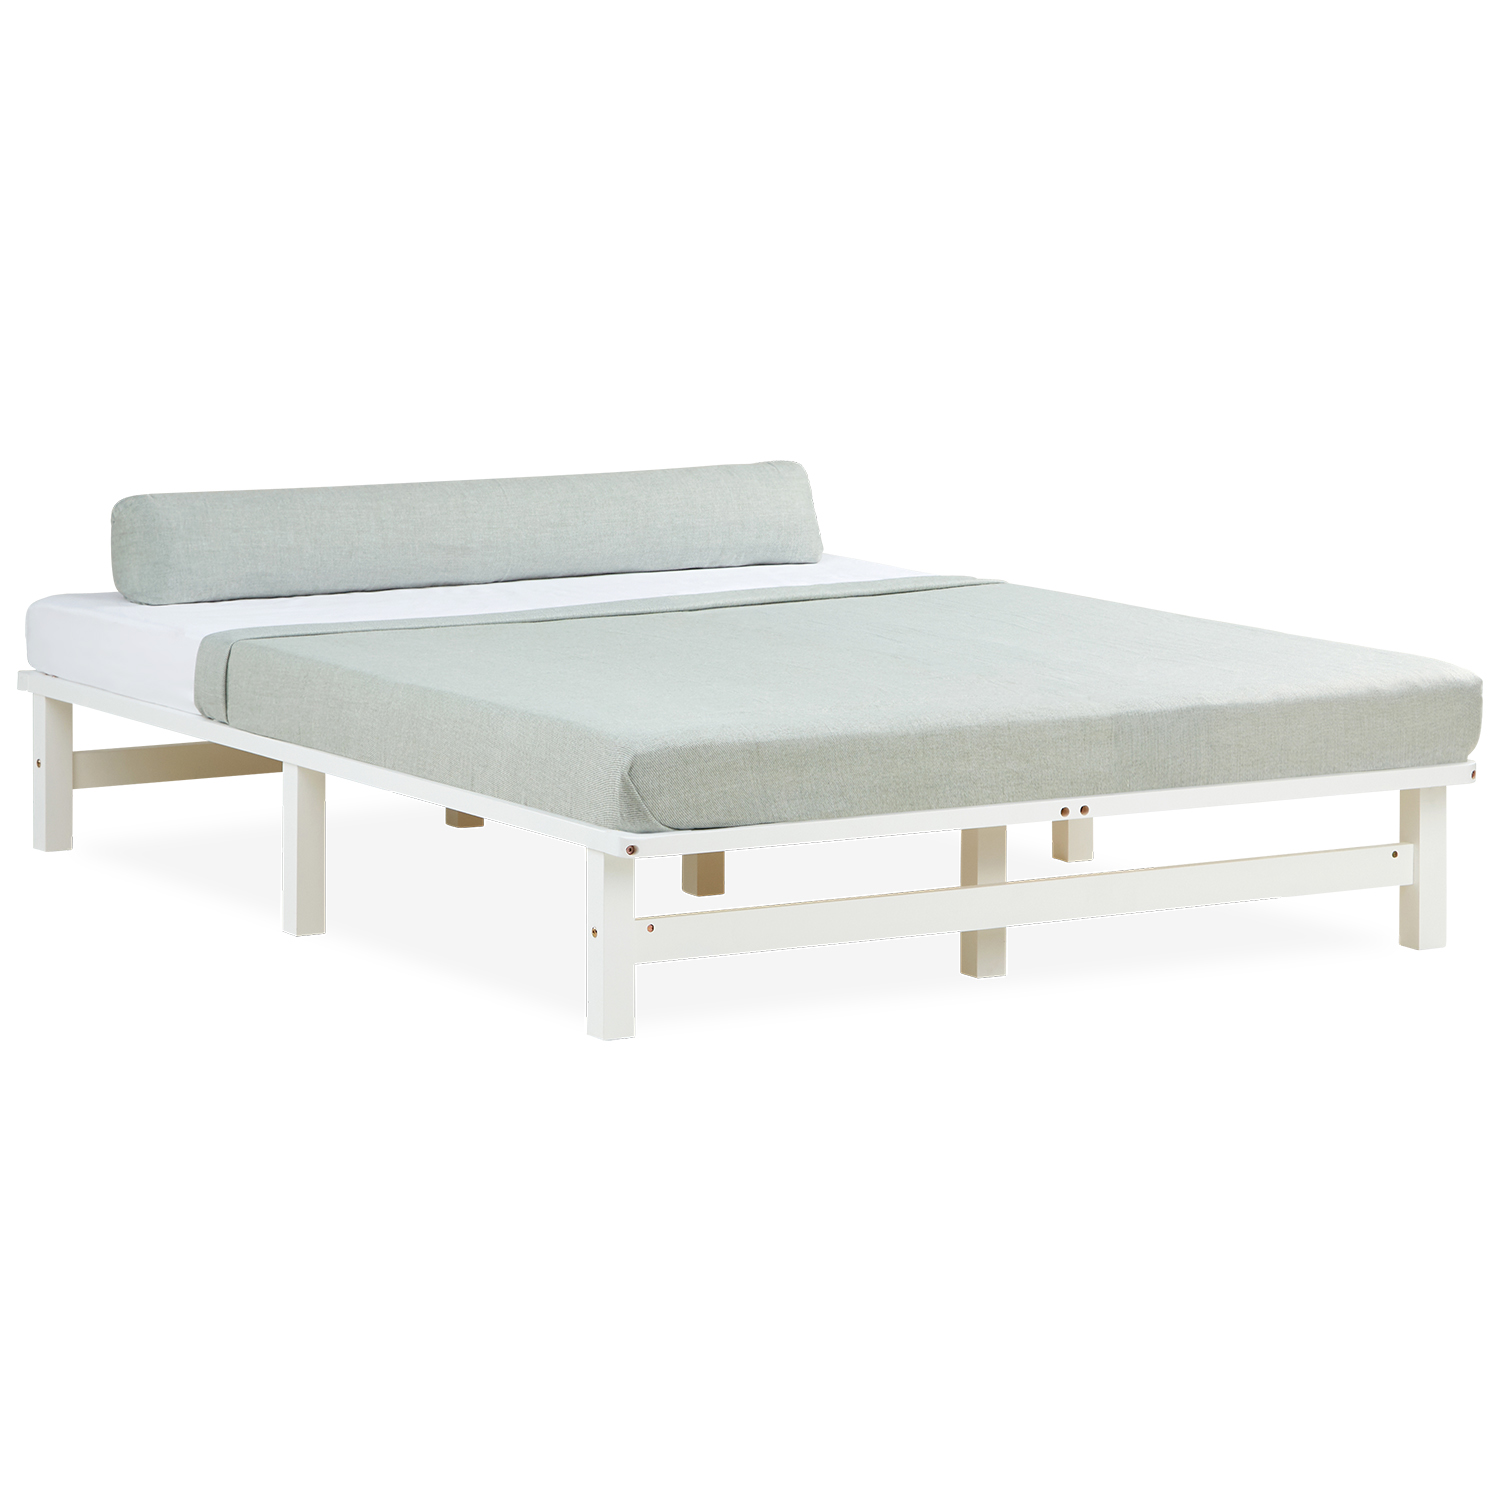 Pallet Bed Natural White Grey 90x200 140x200 cm with Slats Wooden Bed Solid Wood Bed Futon Bed Pallet Furniture 